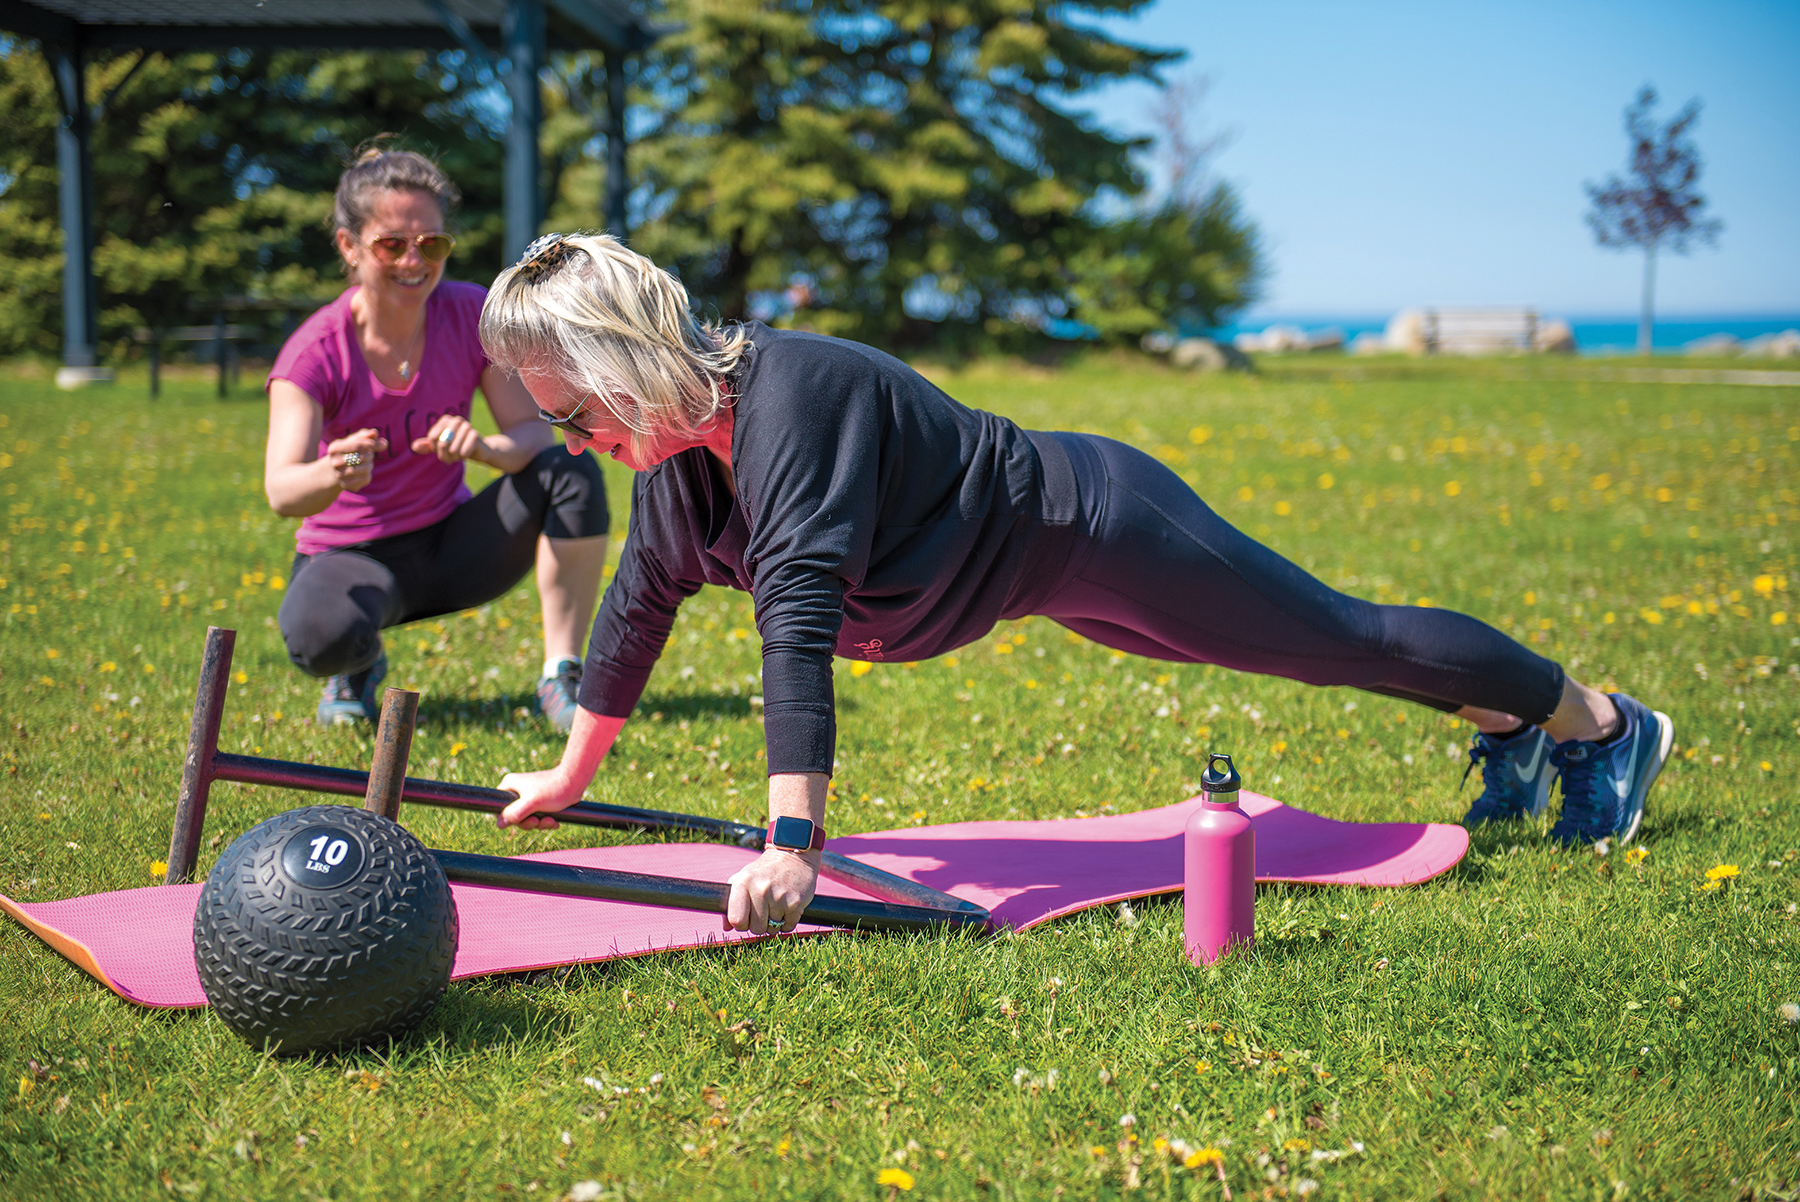 Good Energy Coach Sarah Heipel takes her client Clare Naumovski through a bootcamp workout session at Sunset Point Park in Collingwood.